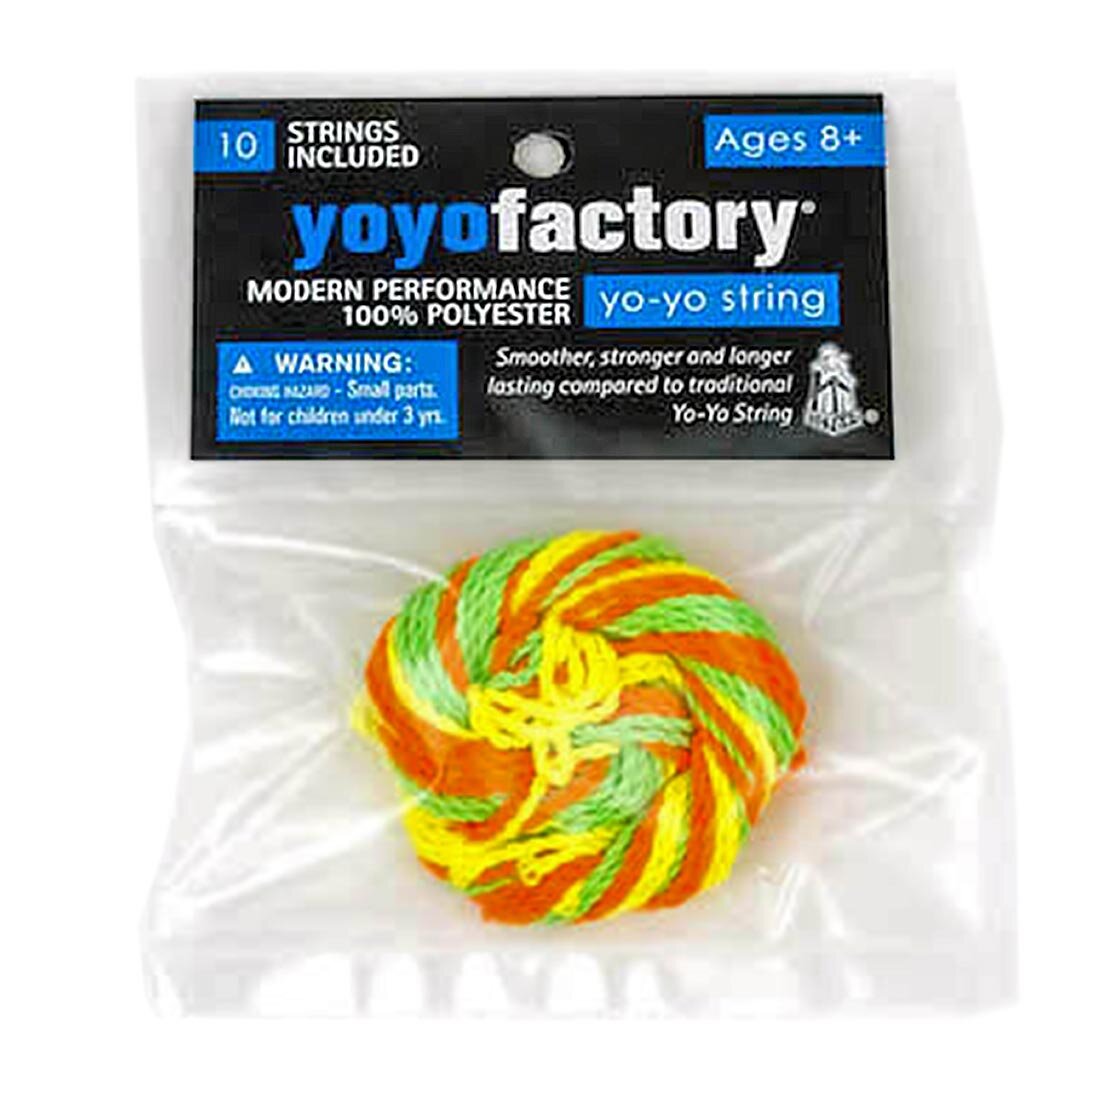 Replacement 10 YoYo strings, yellow, green, and orange